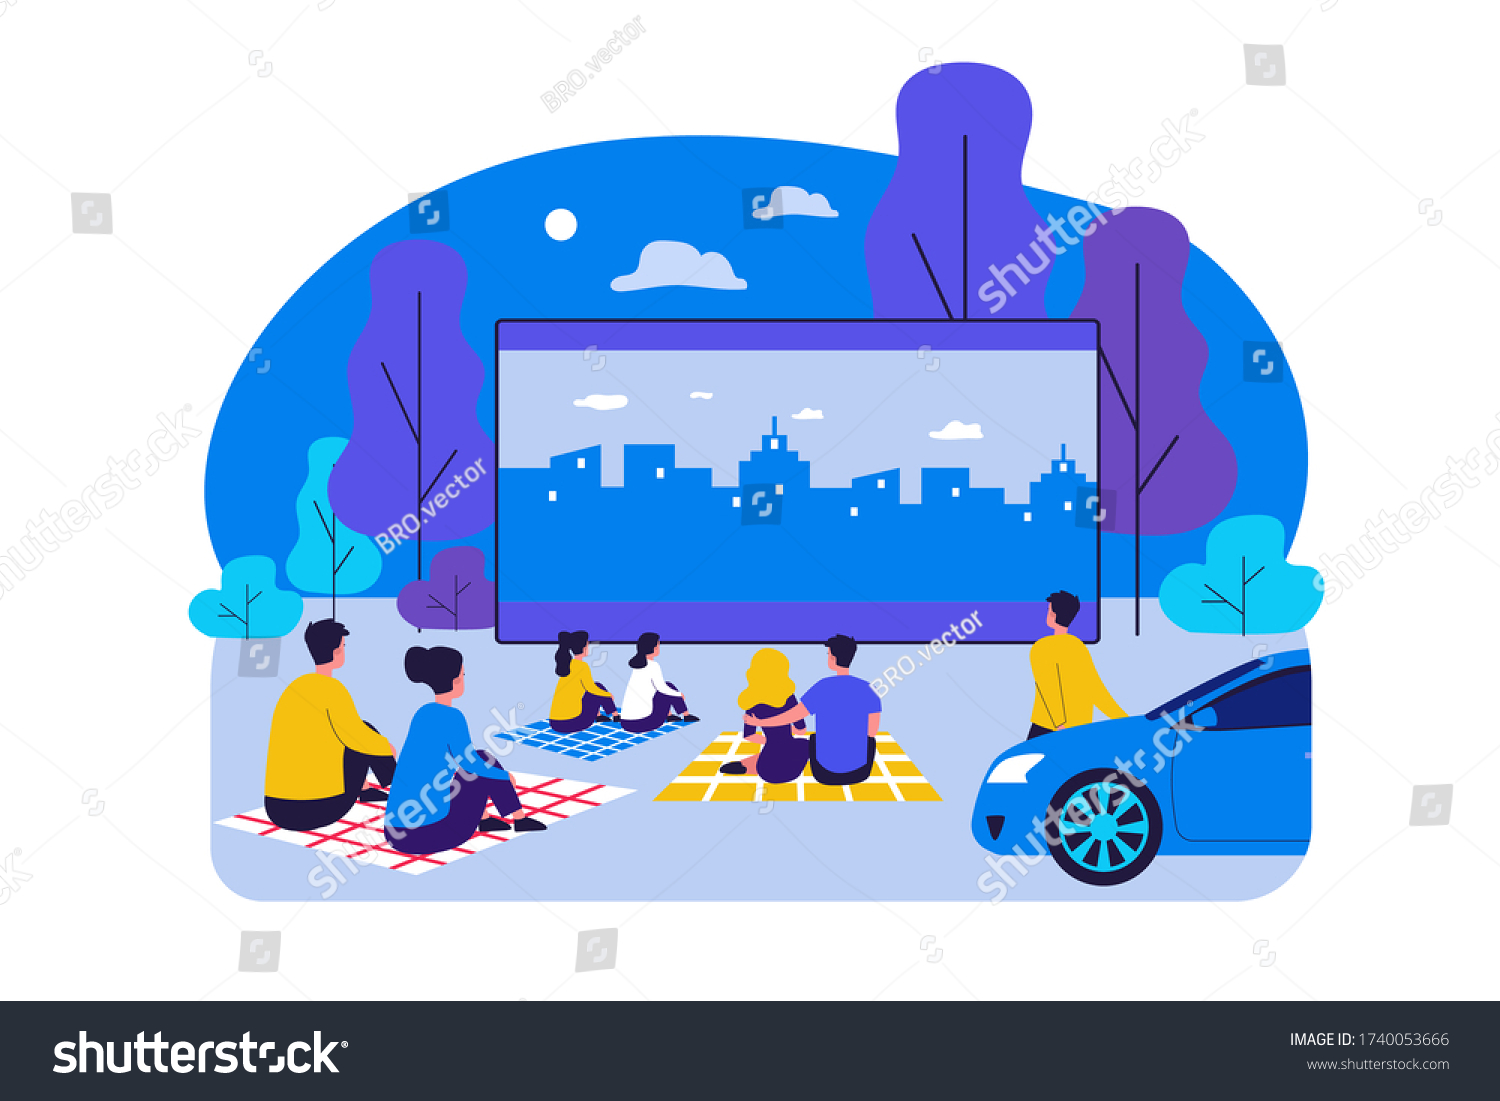 Outdoor cinema theater big screen. Friends and dating couples watching open air movie at night. Vector illustration for evening leisure, vacation, weekend concept #1740053666